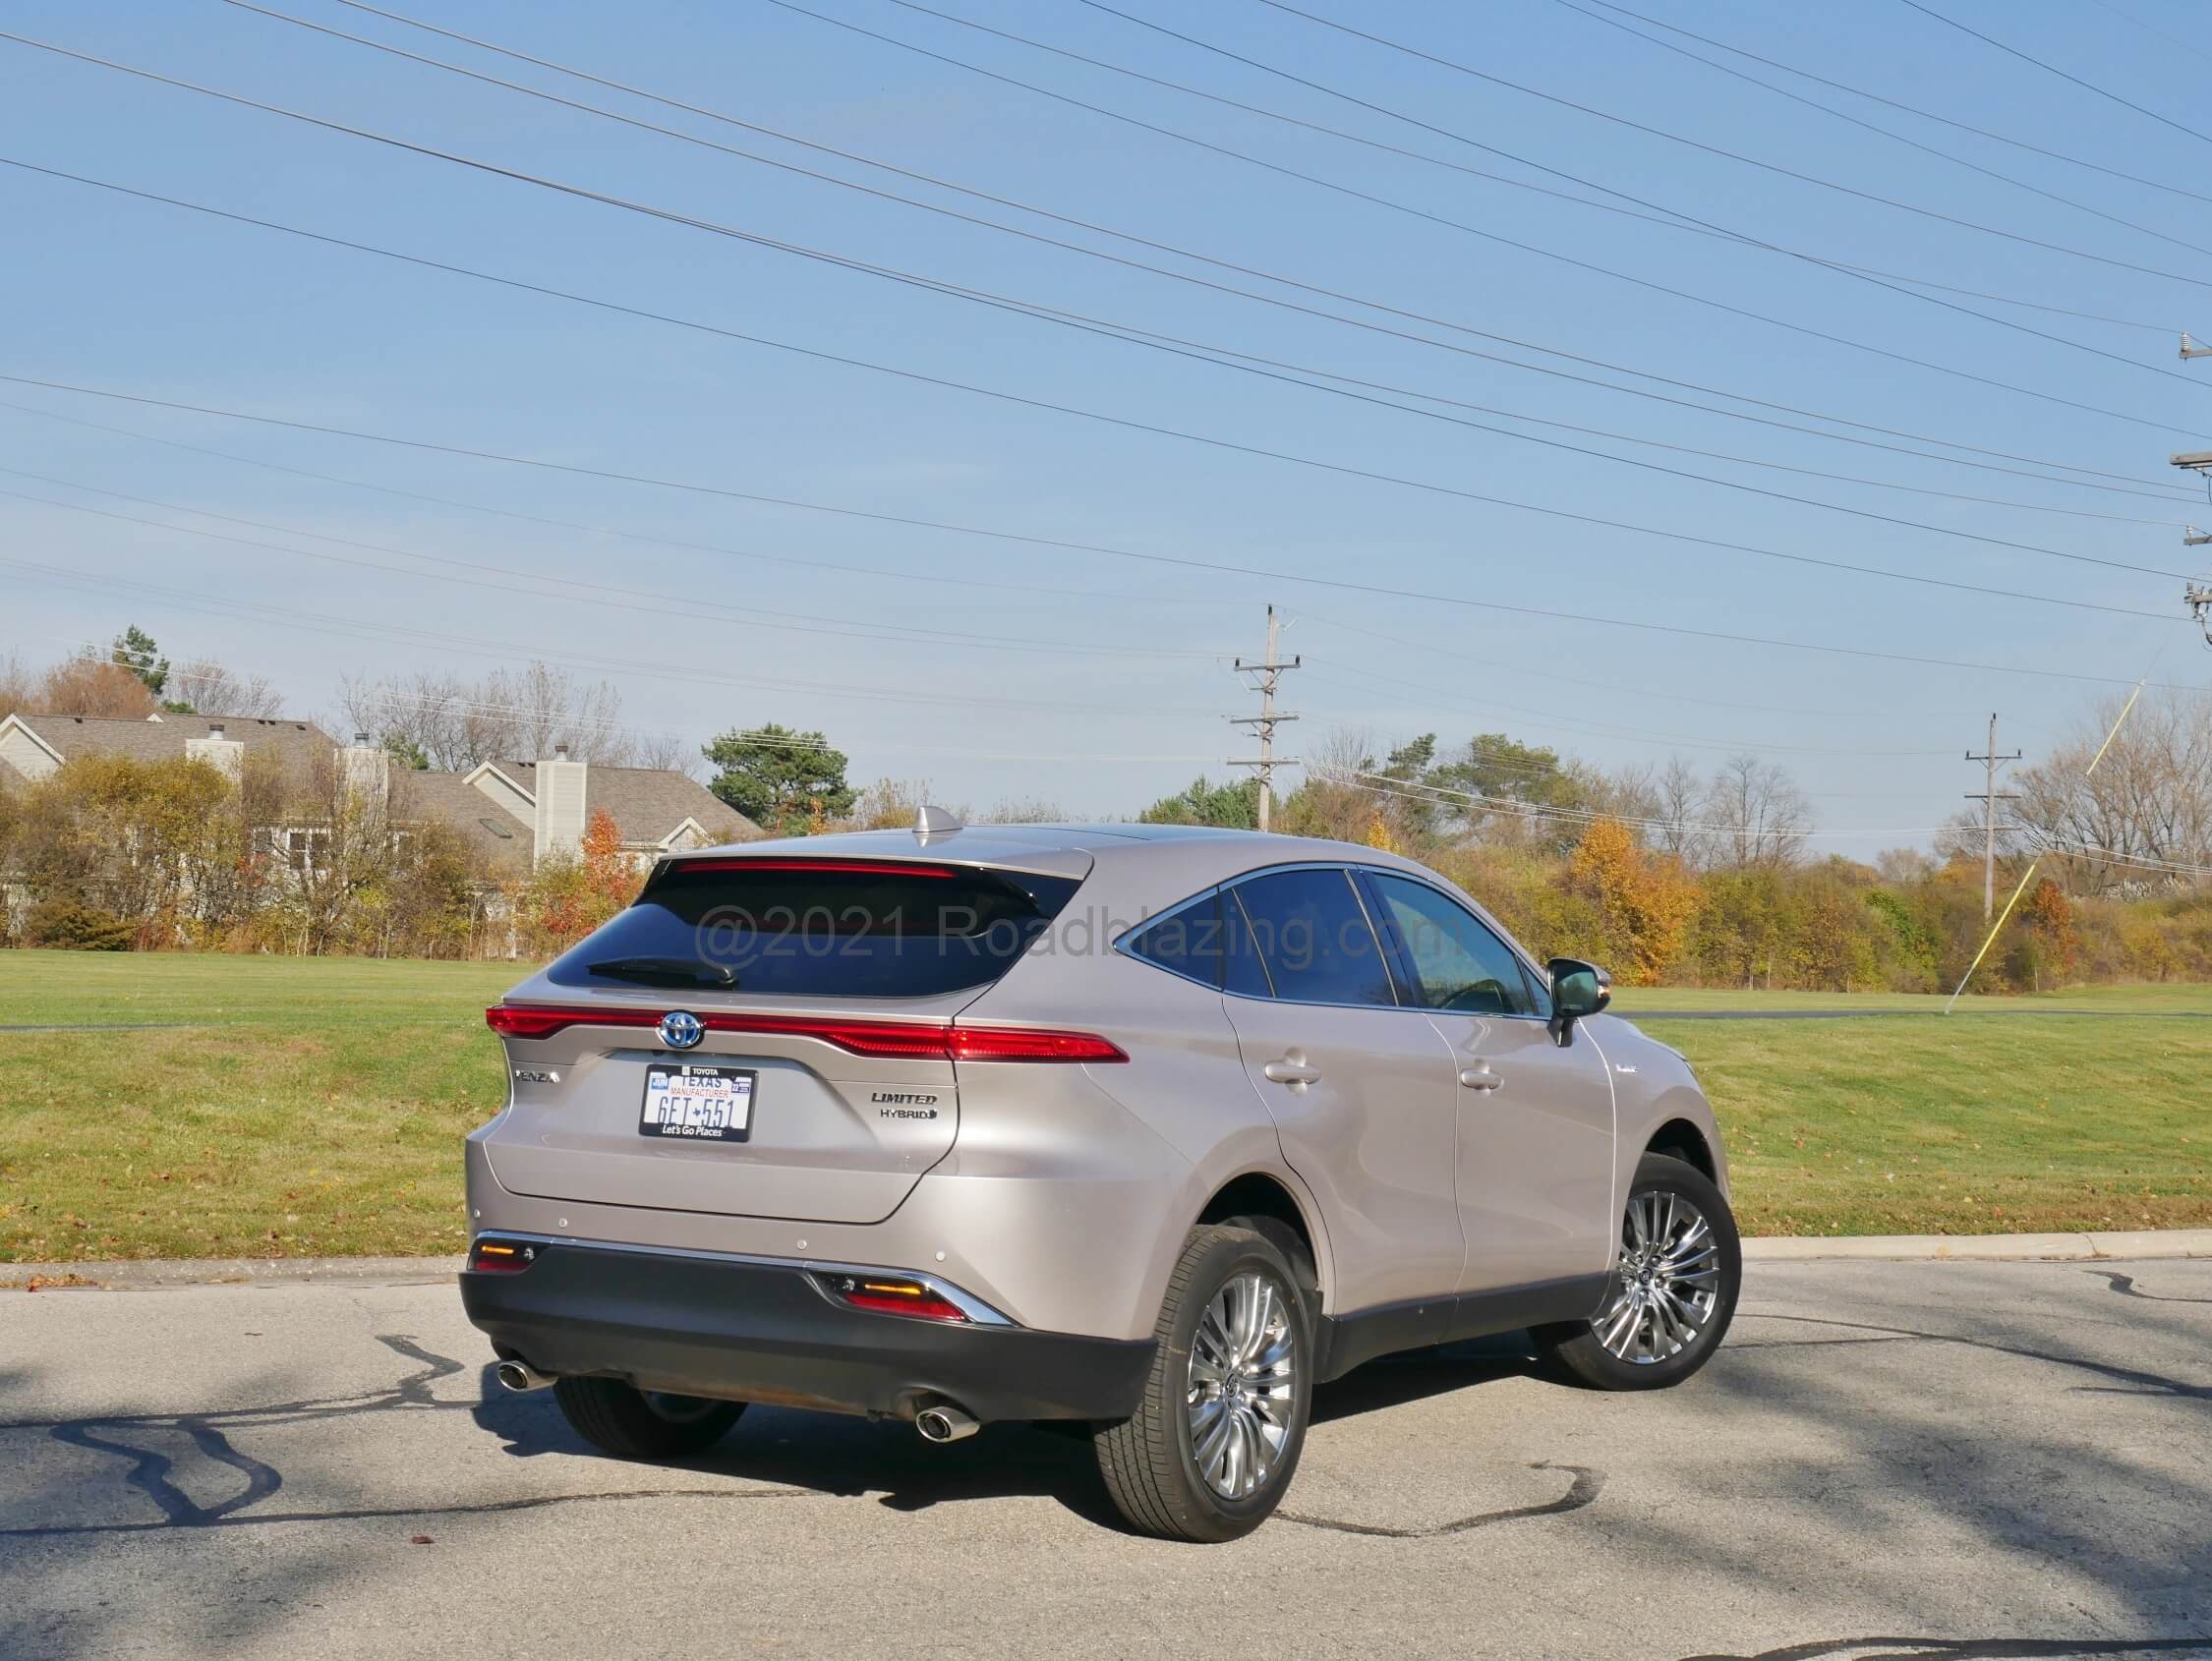 2021 Toyota Venza Hybrid Limited: A floating roof and sloped liftgate with thin racetrack style full wrap-around LED taillamps bear a resemblance to the Jaguar F-Pace